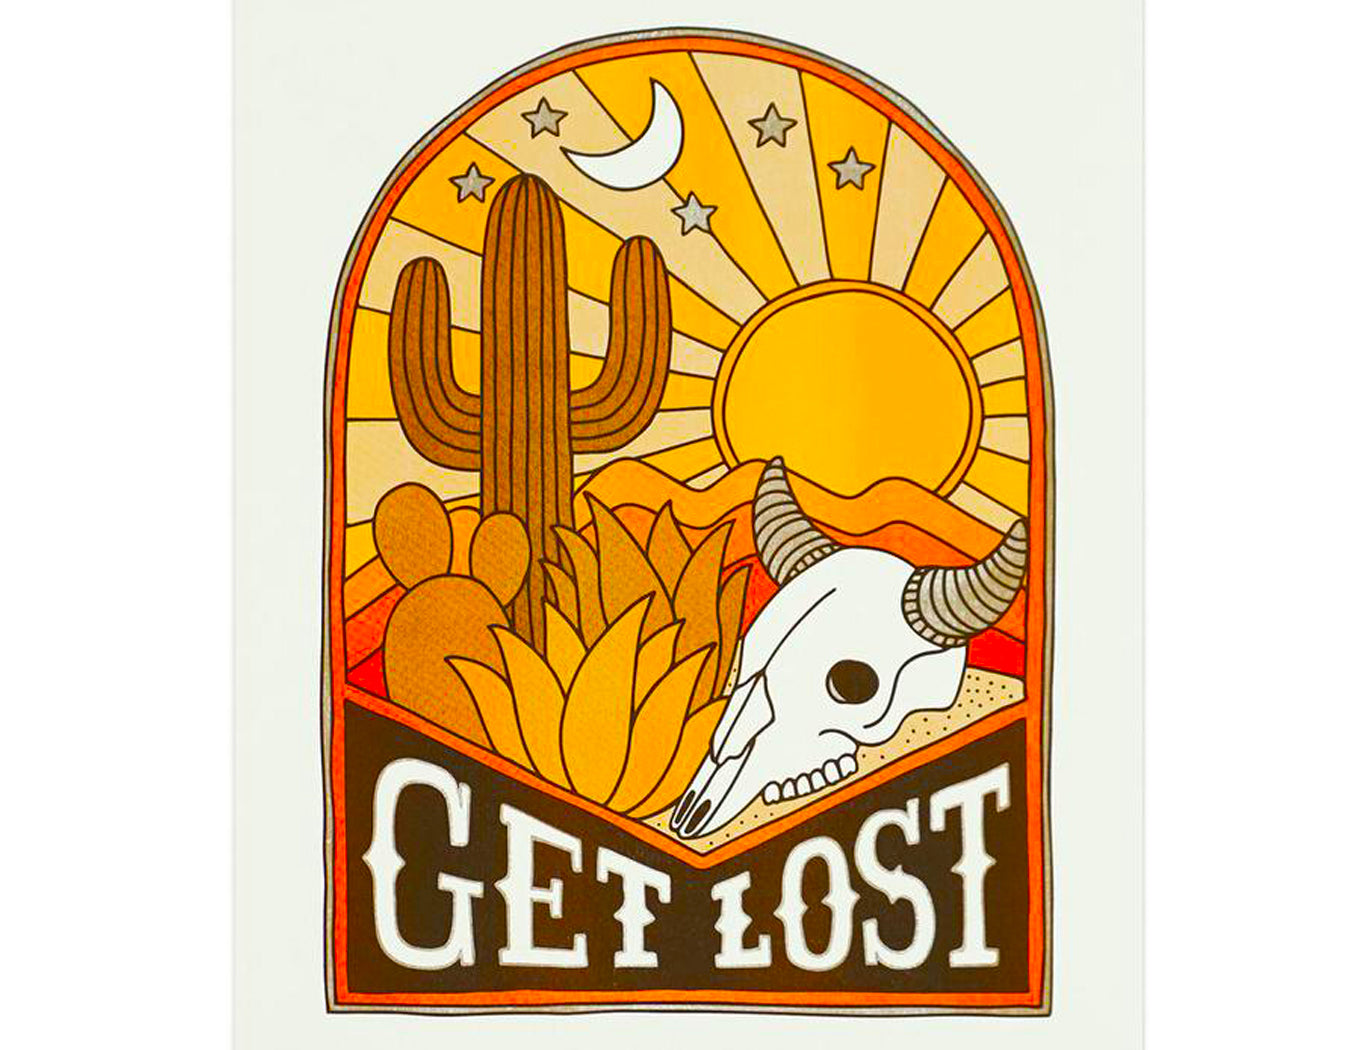 text reads get lost features illustration of cactus sunset stars moon and skull. desert colors.